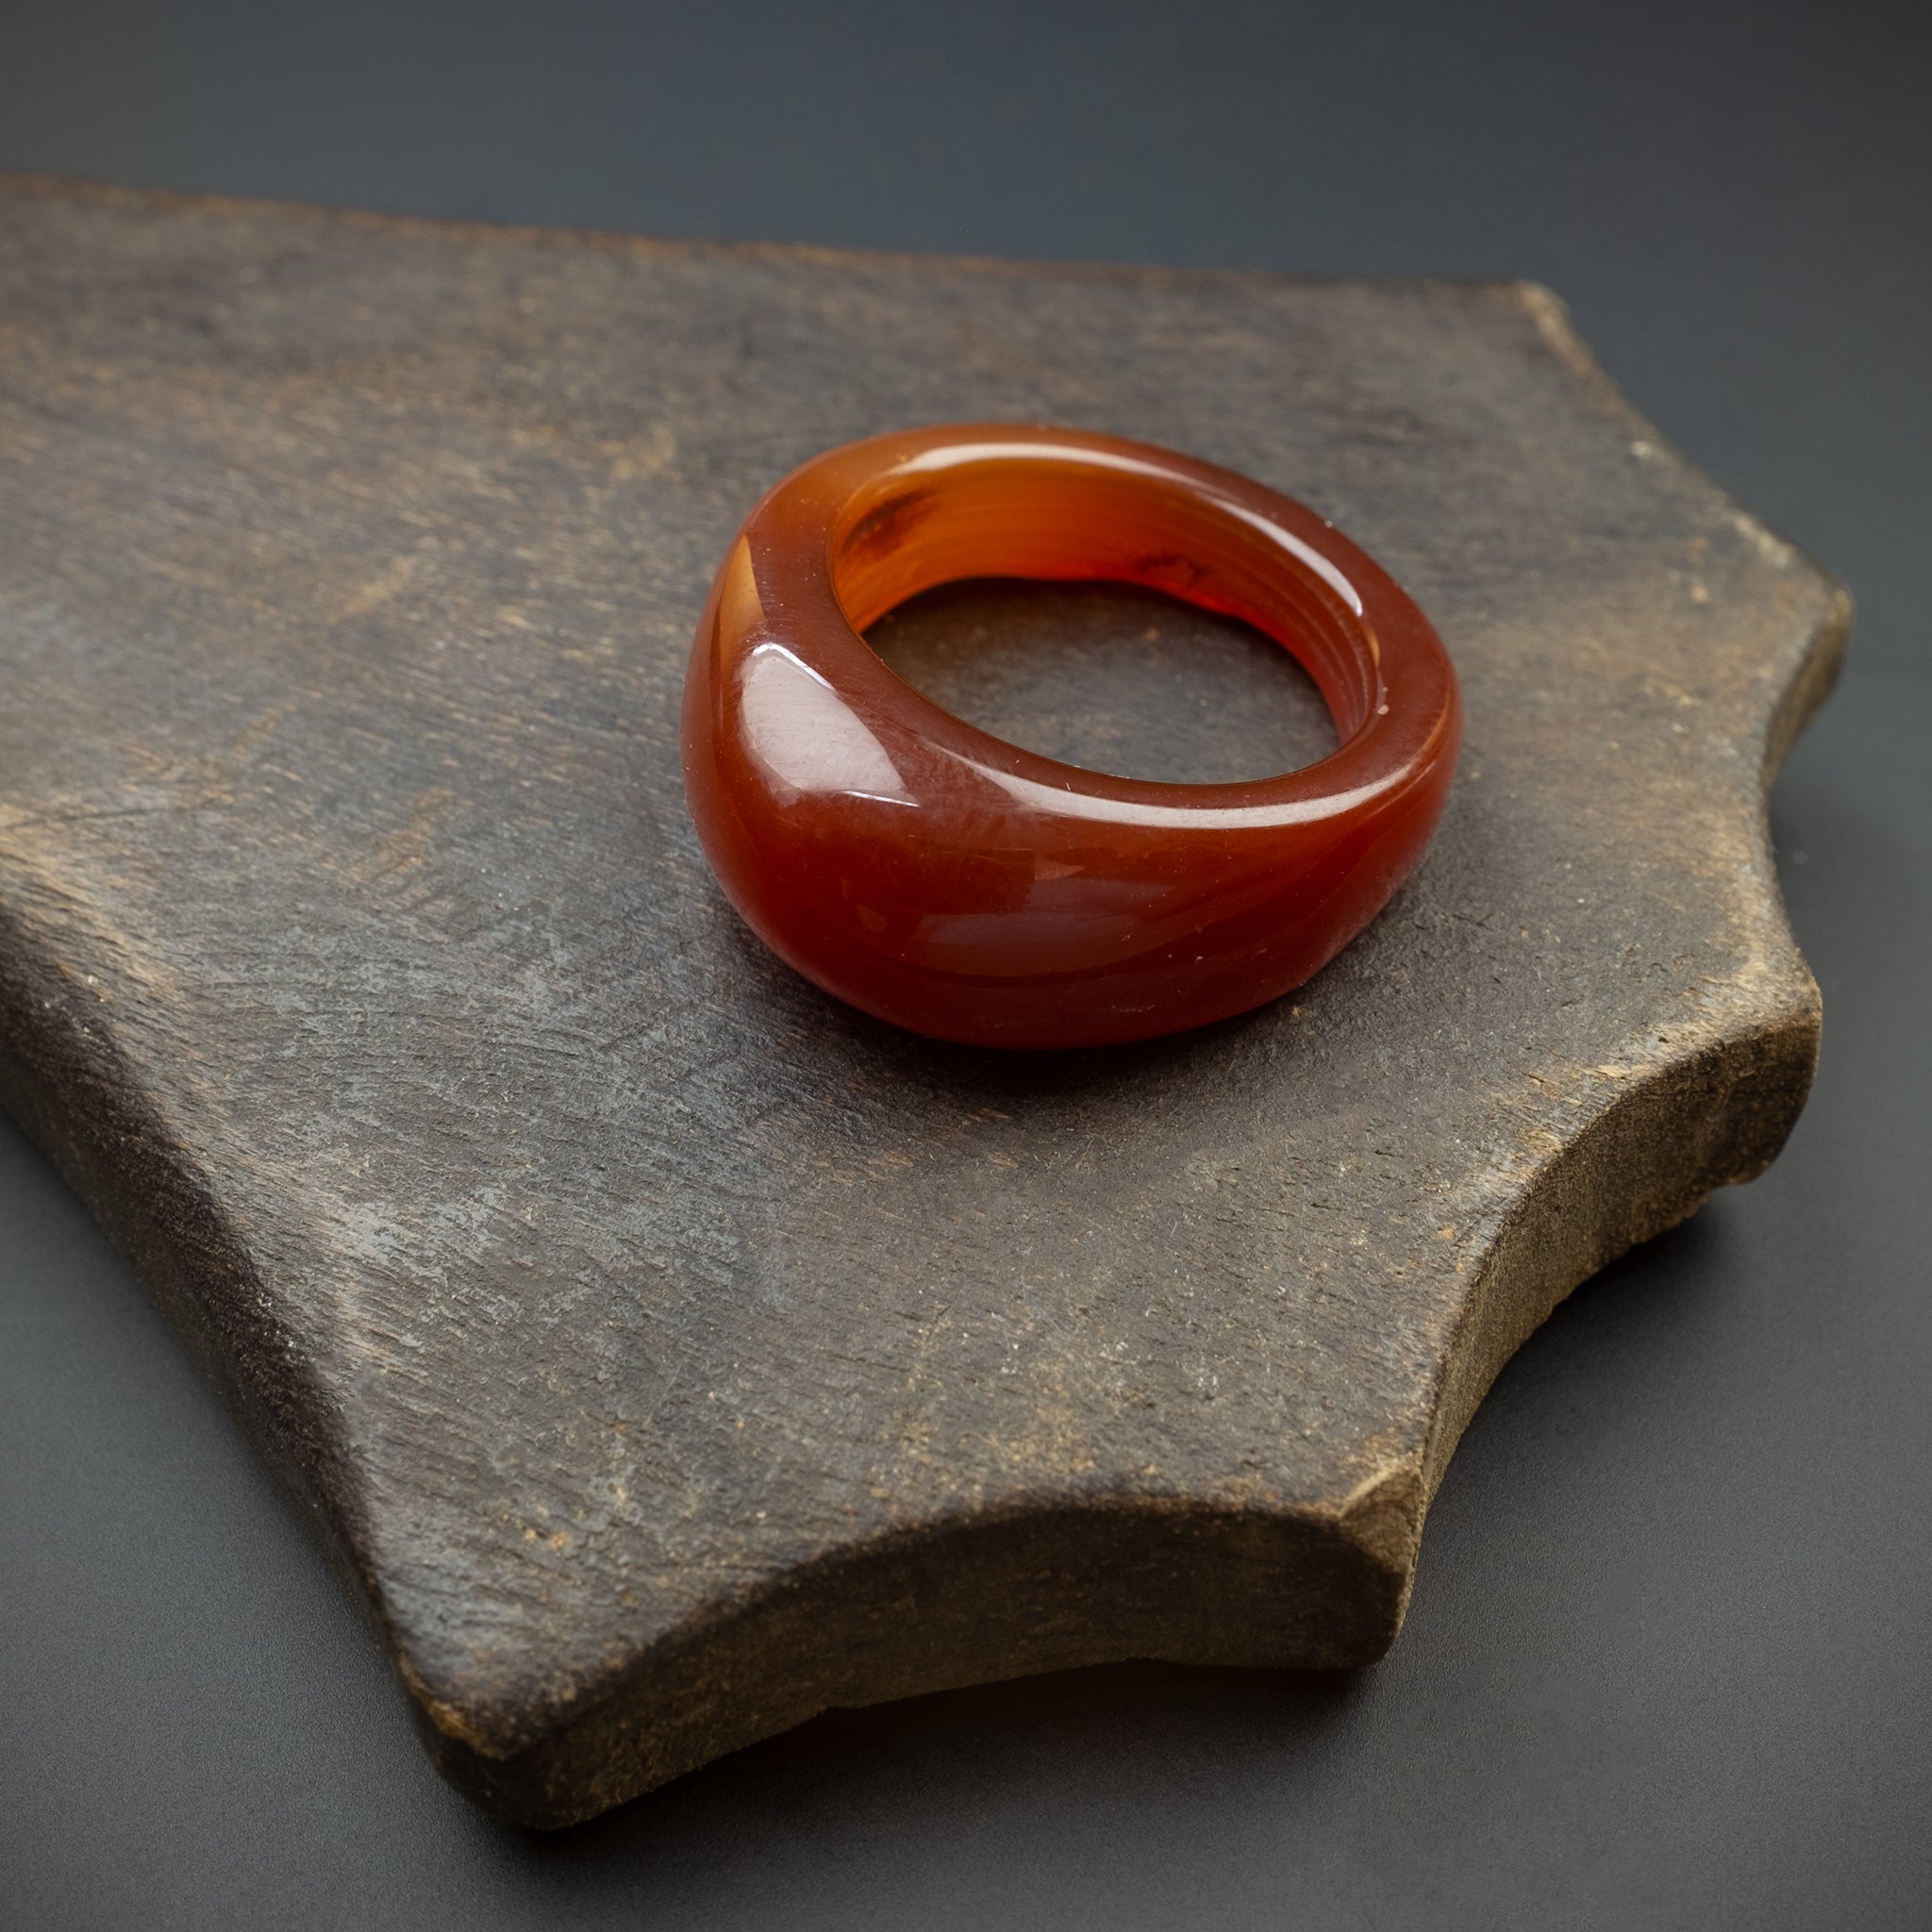 Agate ring, Morocco